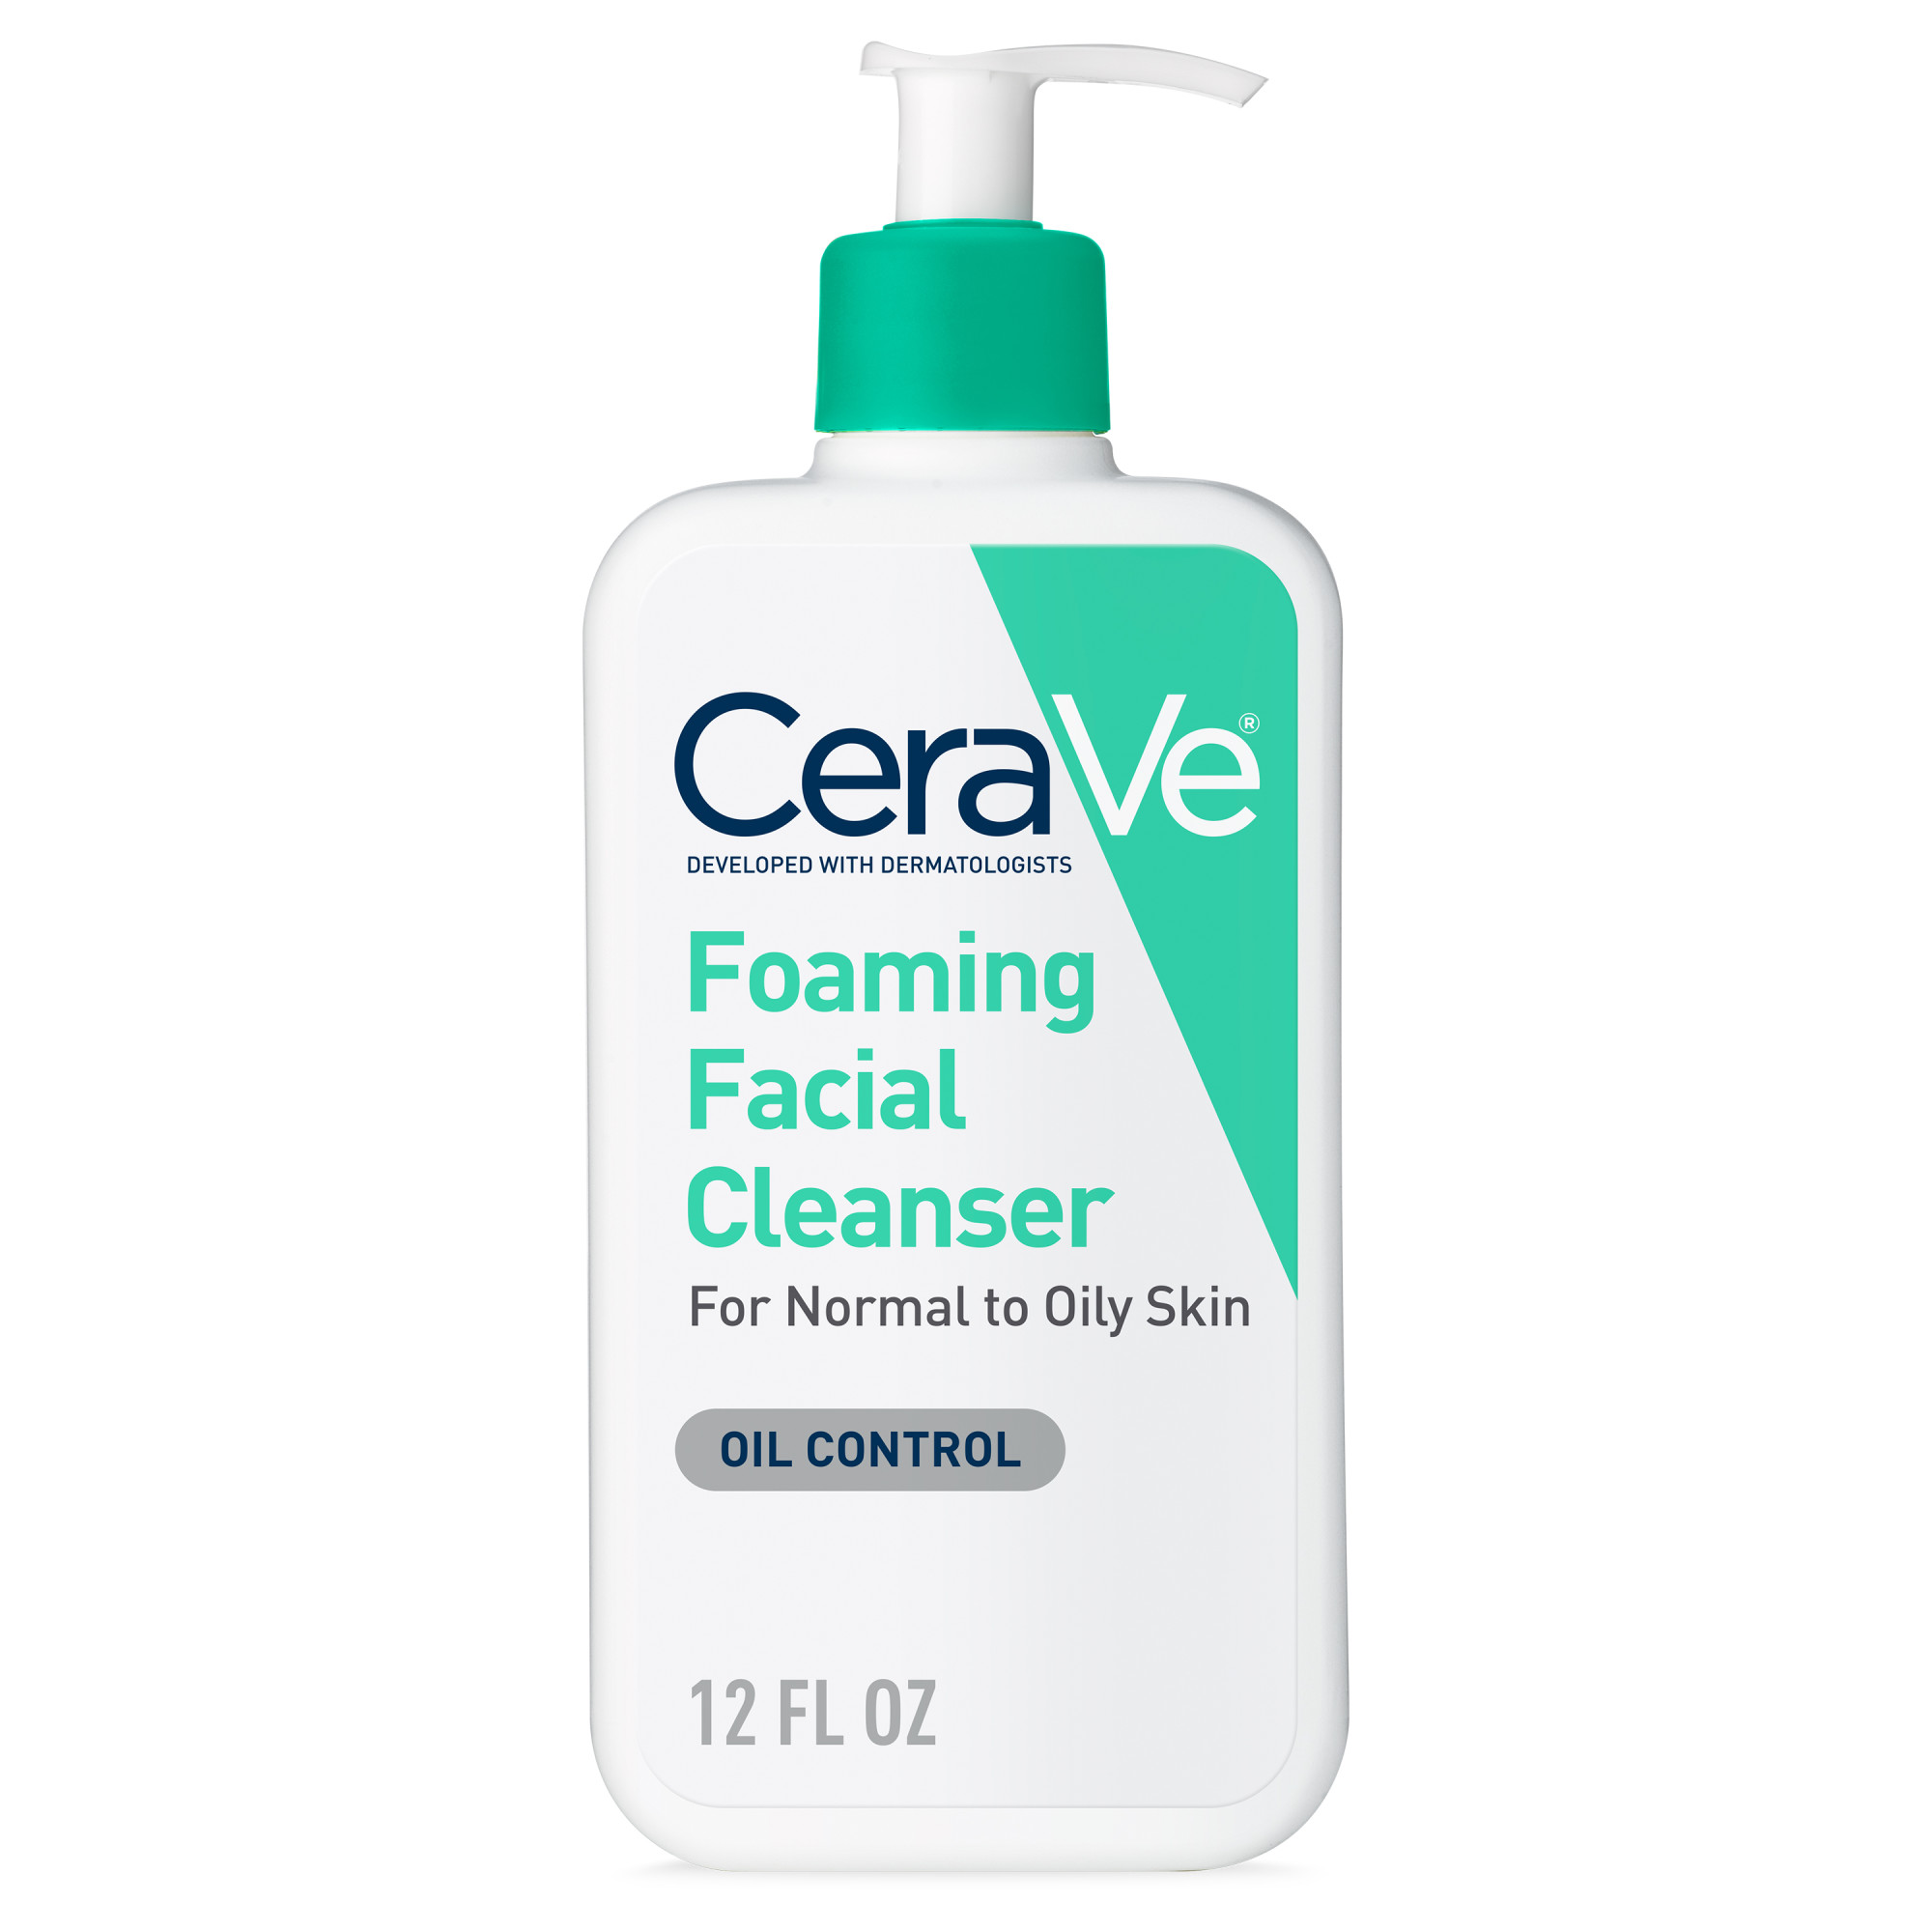 CeraVe Foaming Facial Cleanser, Daily Face Wash for Normal to Oily Skin, 12 fl oz - image 1 of 13